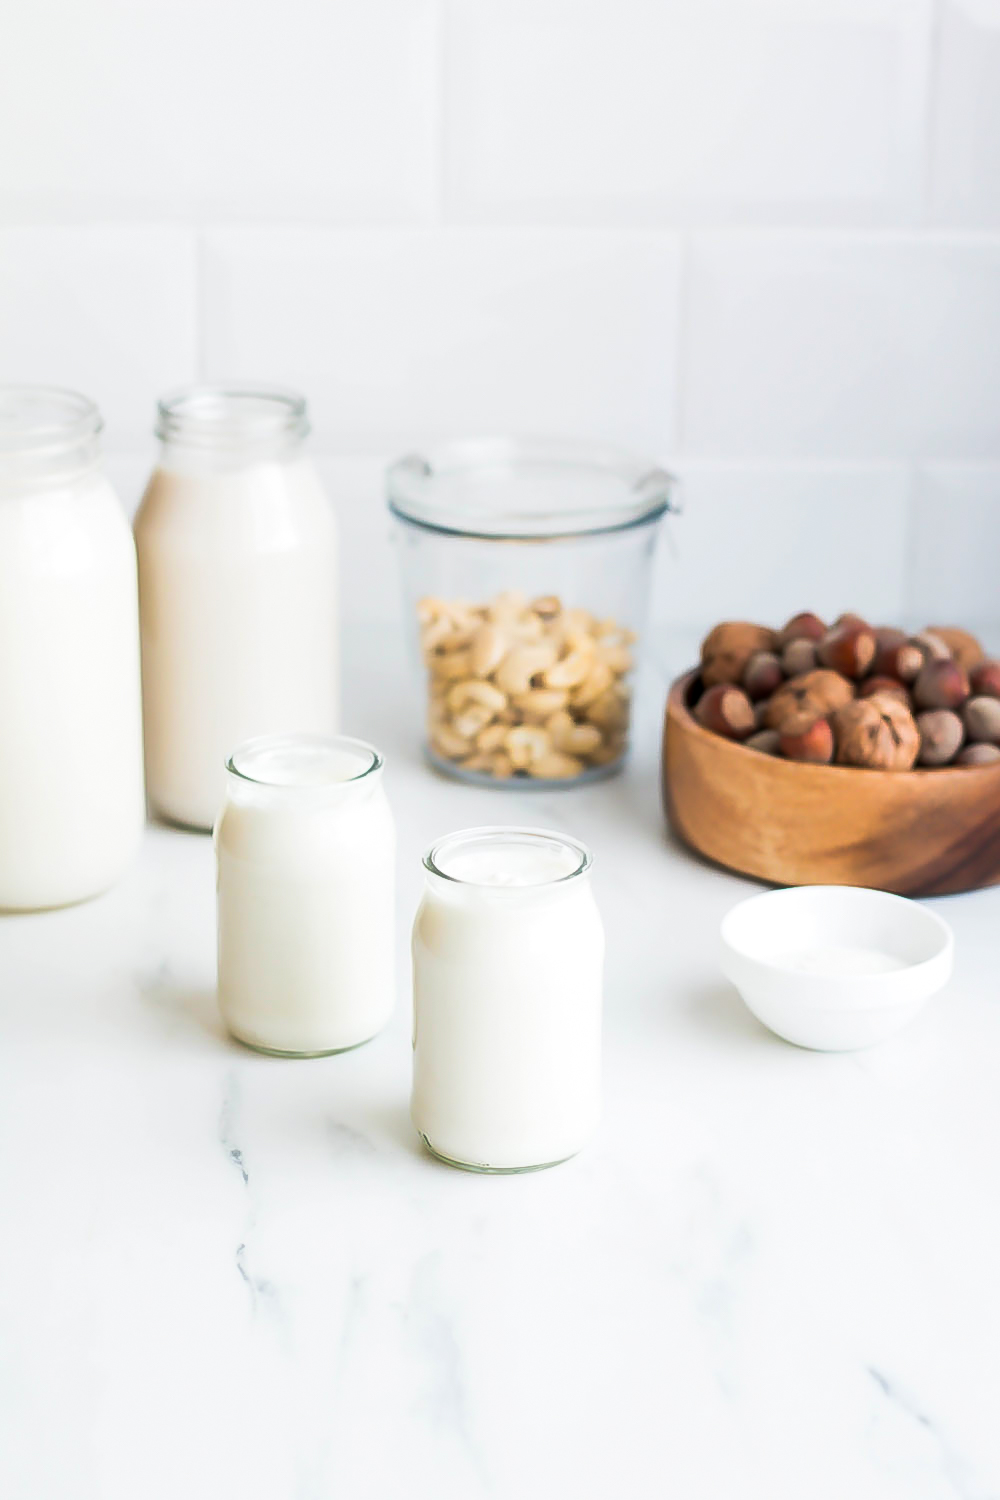 These homemade yogurt and kefir recipes are filled with live cultures that help colonize the intestines with new bacteria and are free from all artificial ingredients! https://www.spotebi.com/recipes/homemade-greek-yogurt-vegan-kefir/